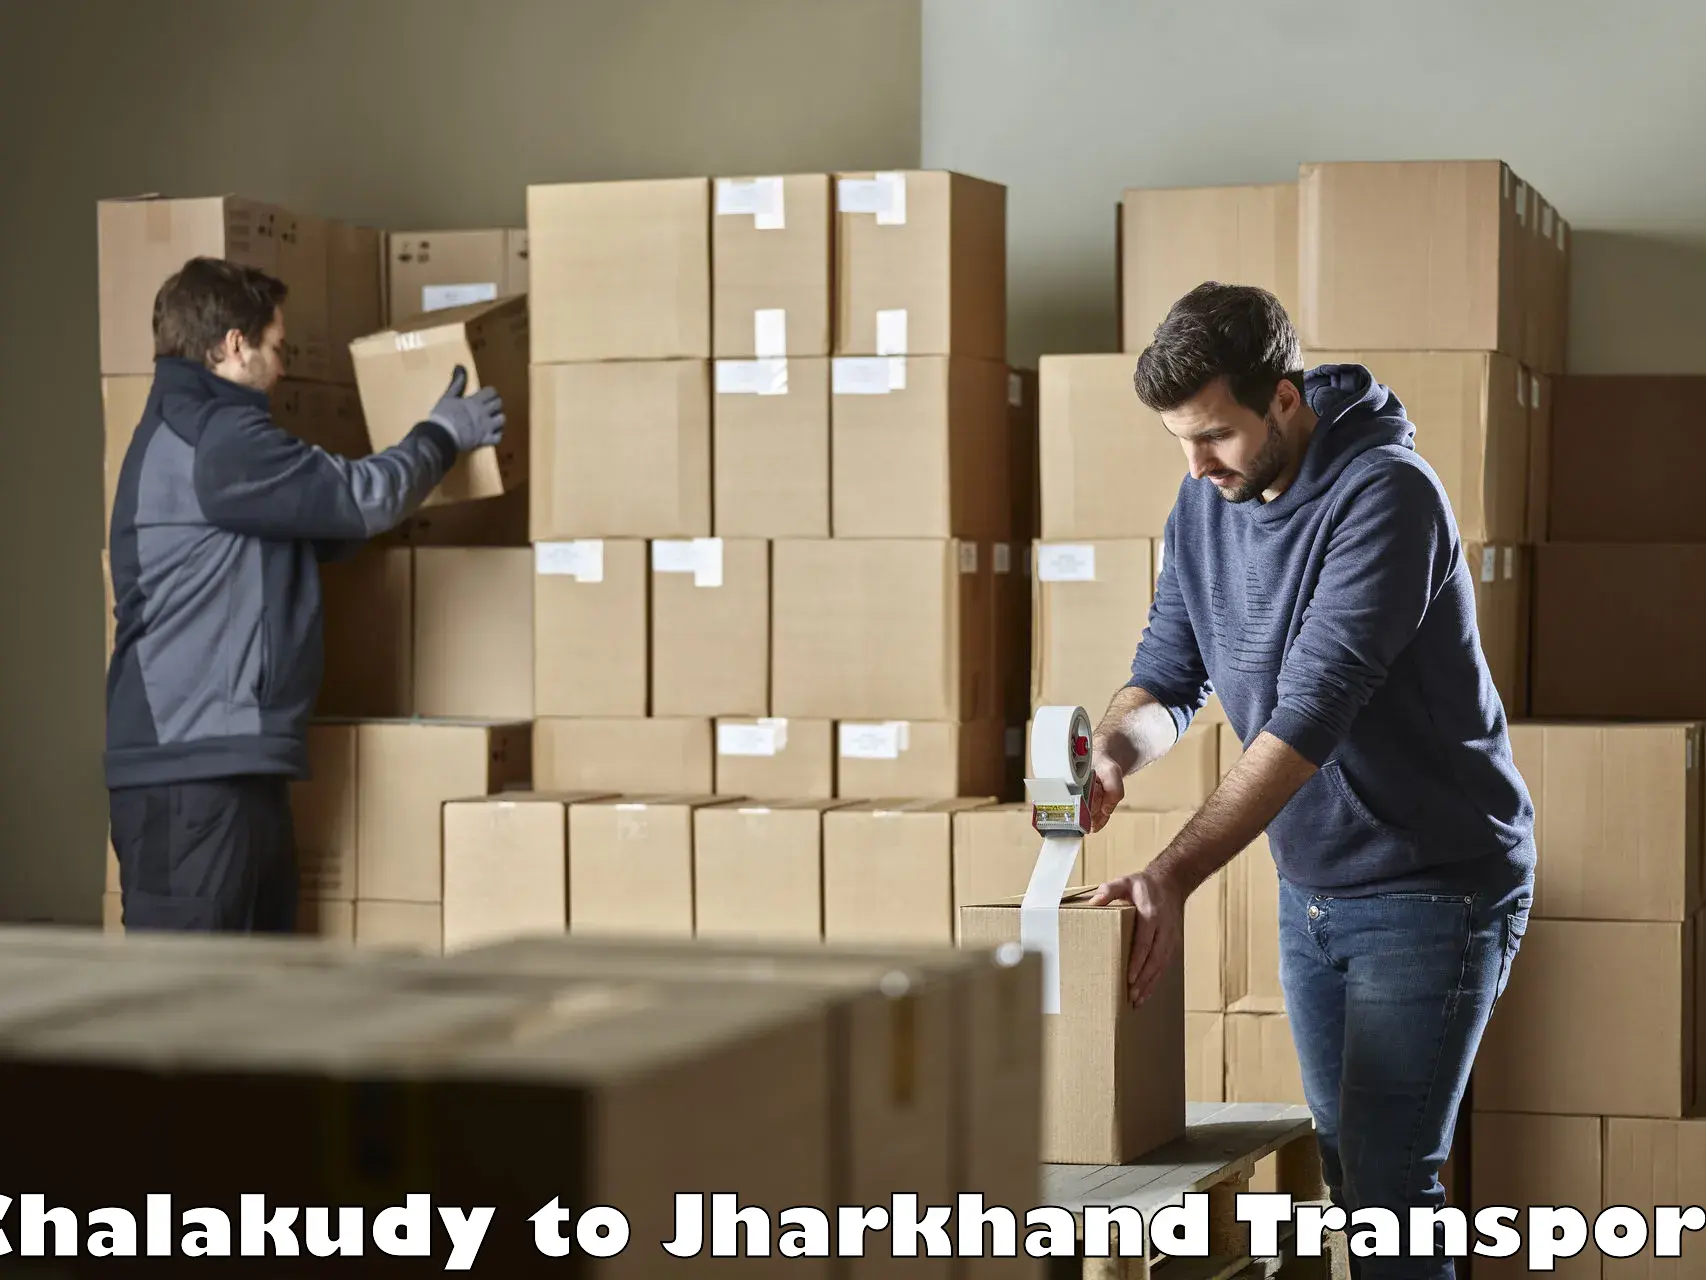 Furniture transport service Chalakudy to Dhanbad